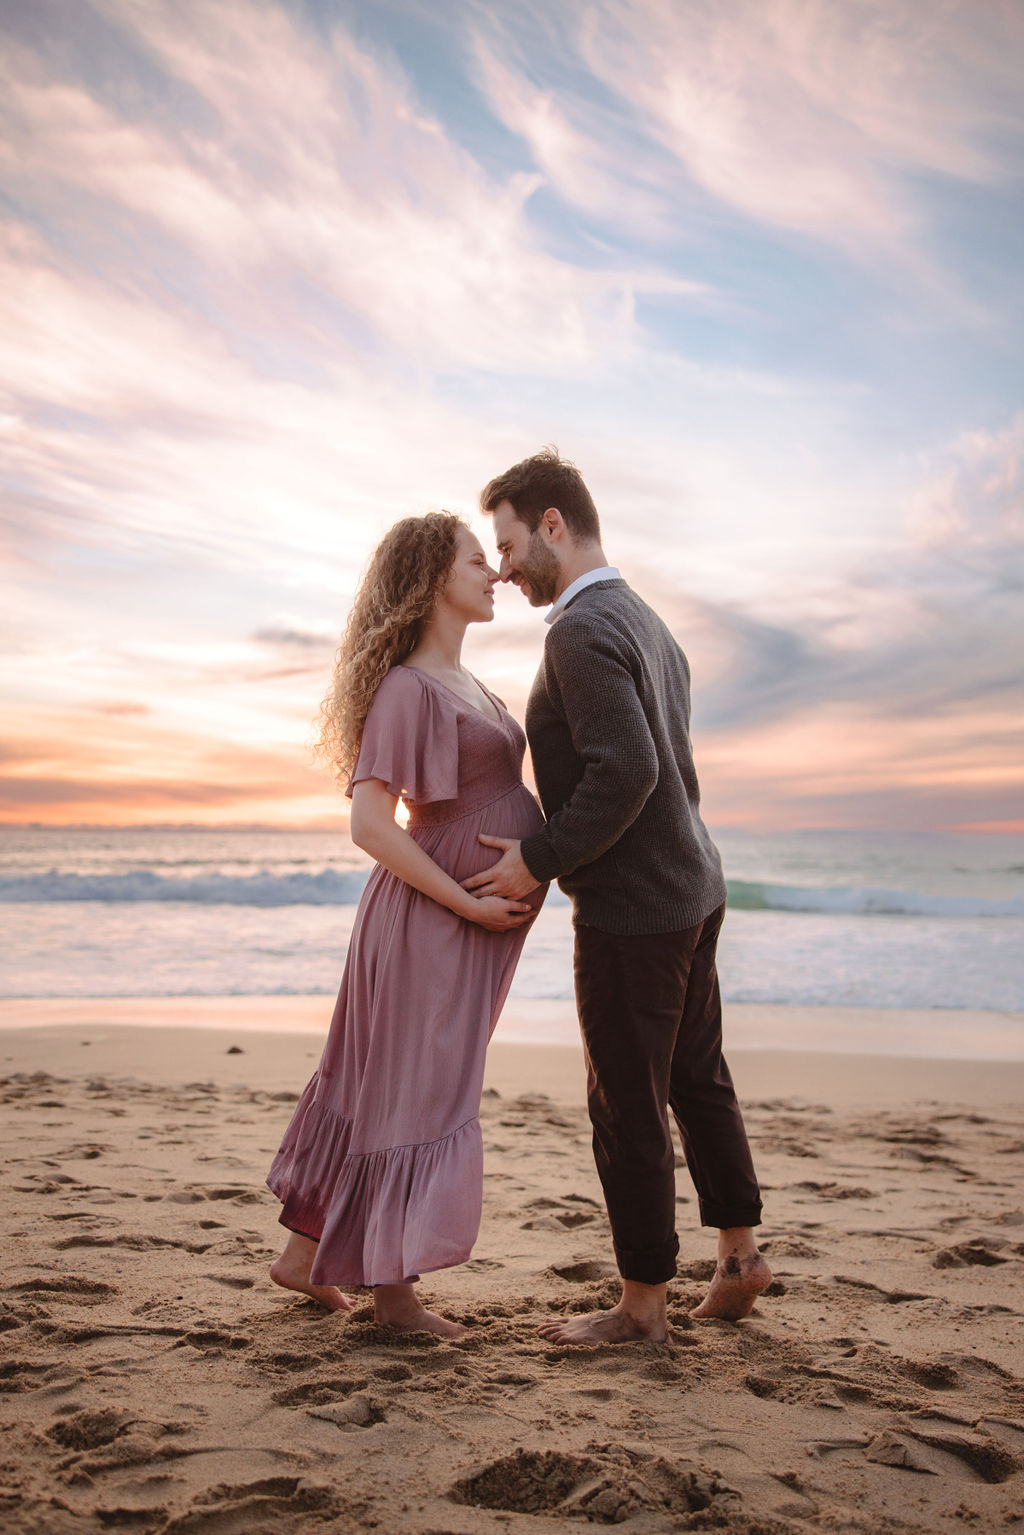 A couple holding hands and walking on a beach at sunset during their beach maternity photos